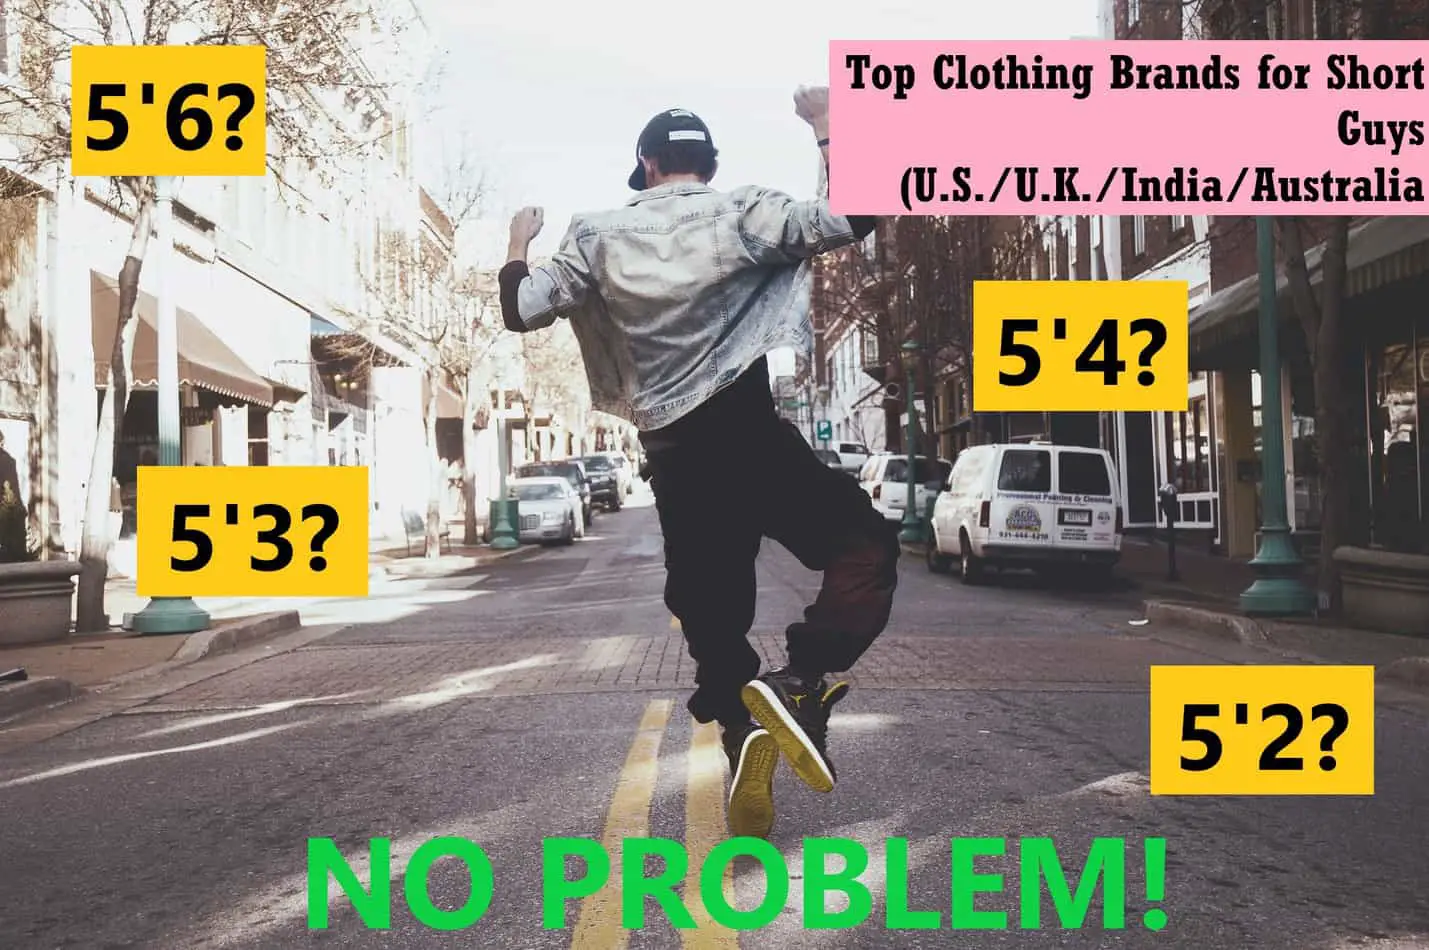 Top Clothing brands for short guys